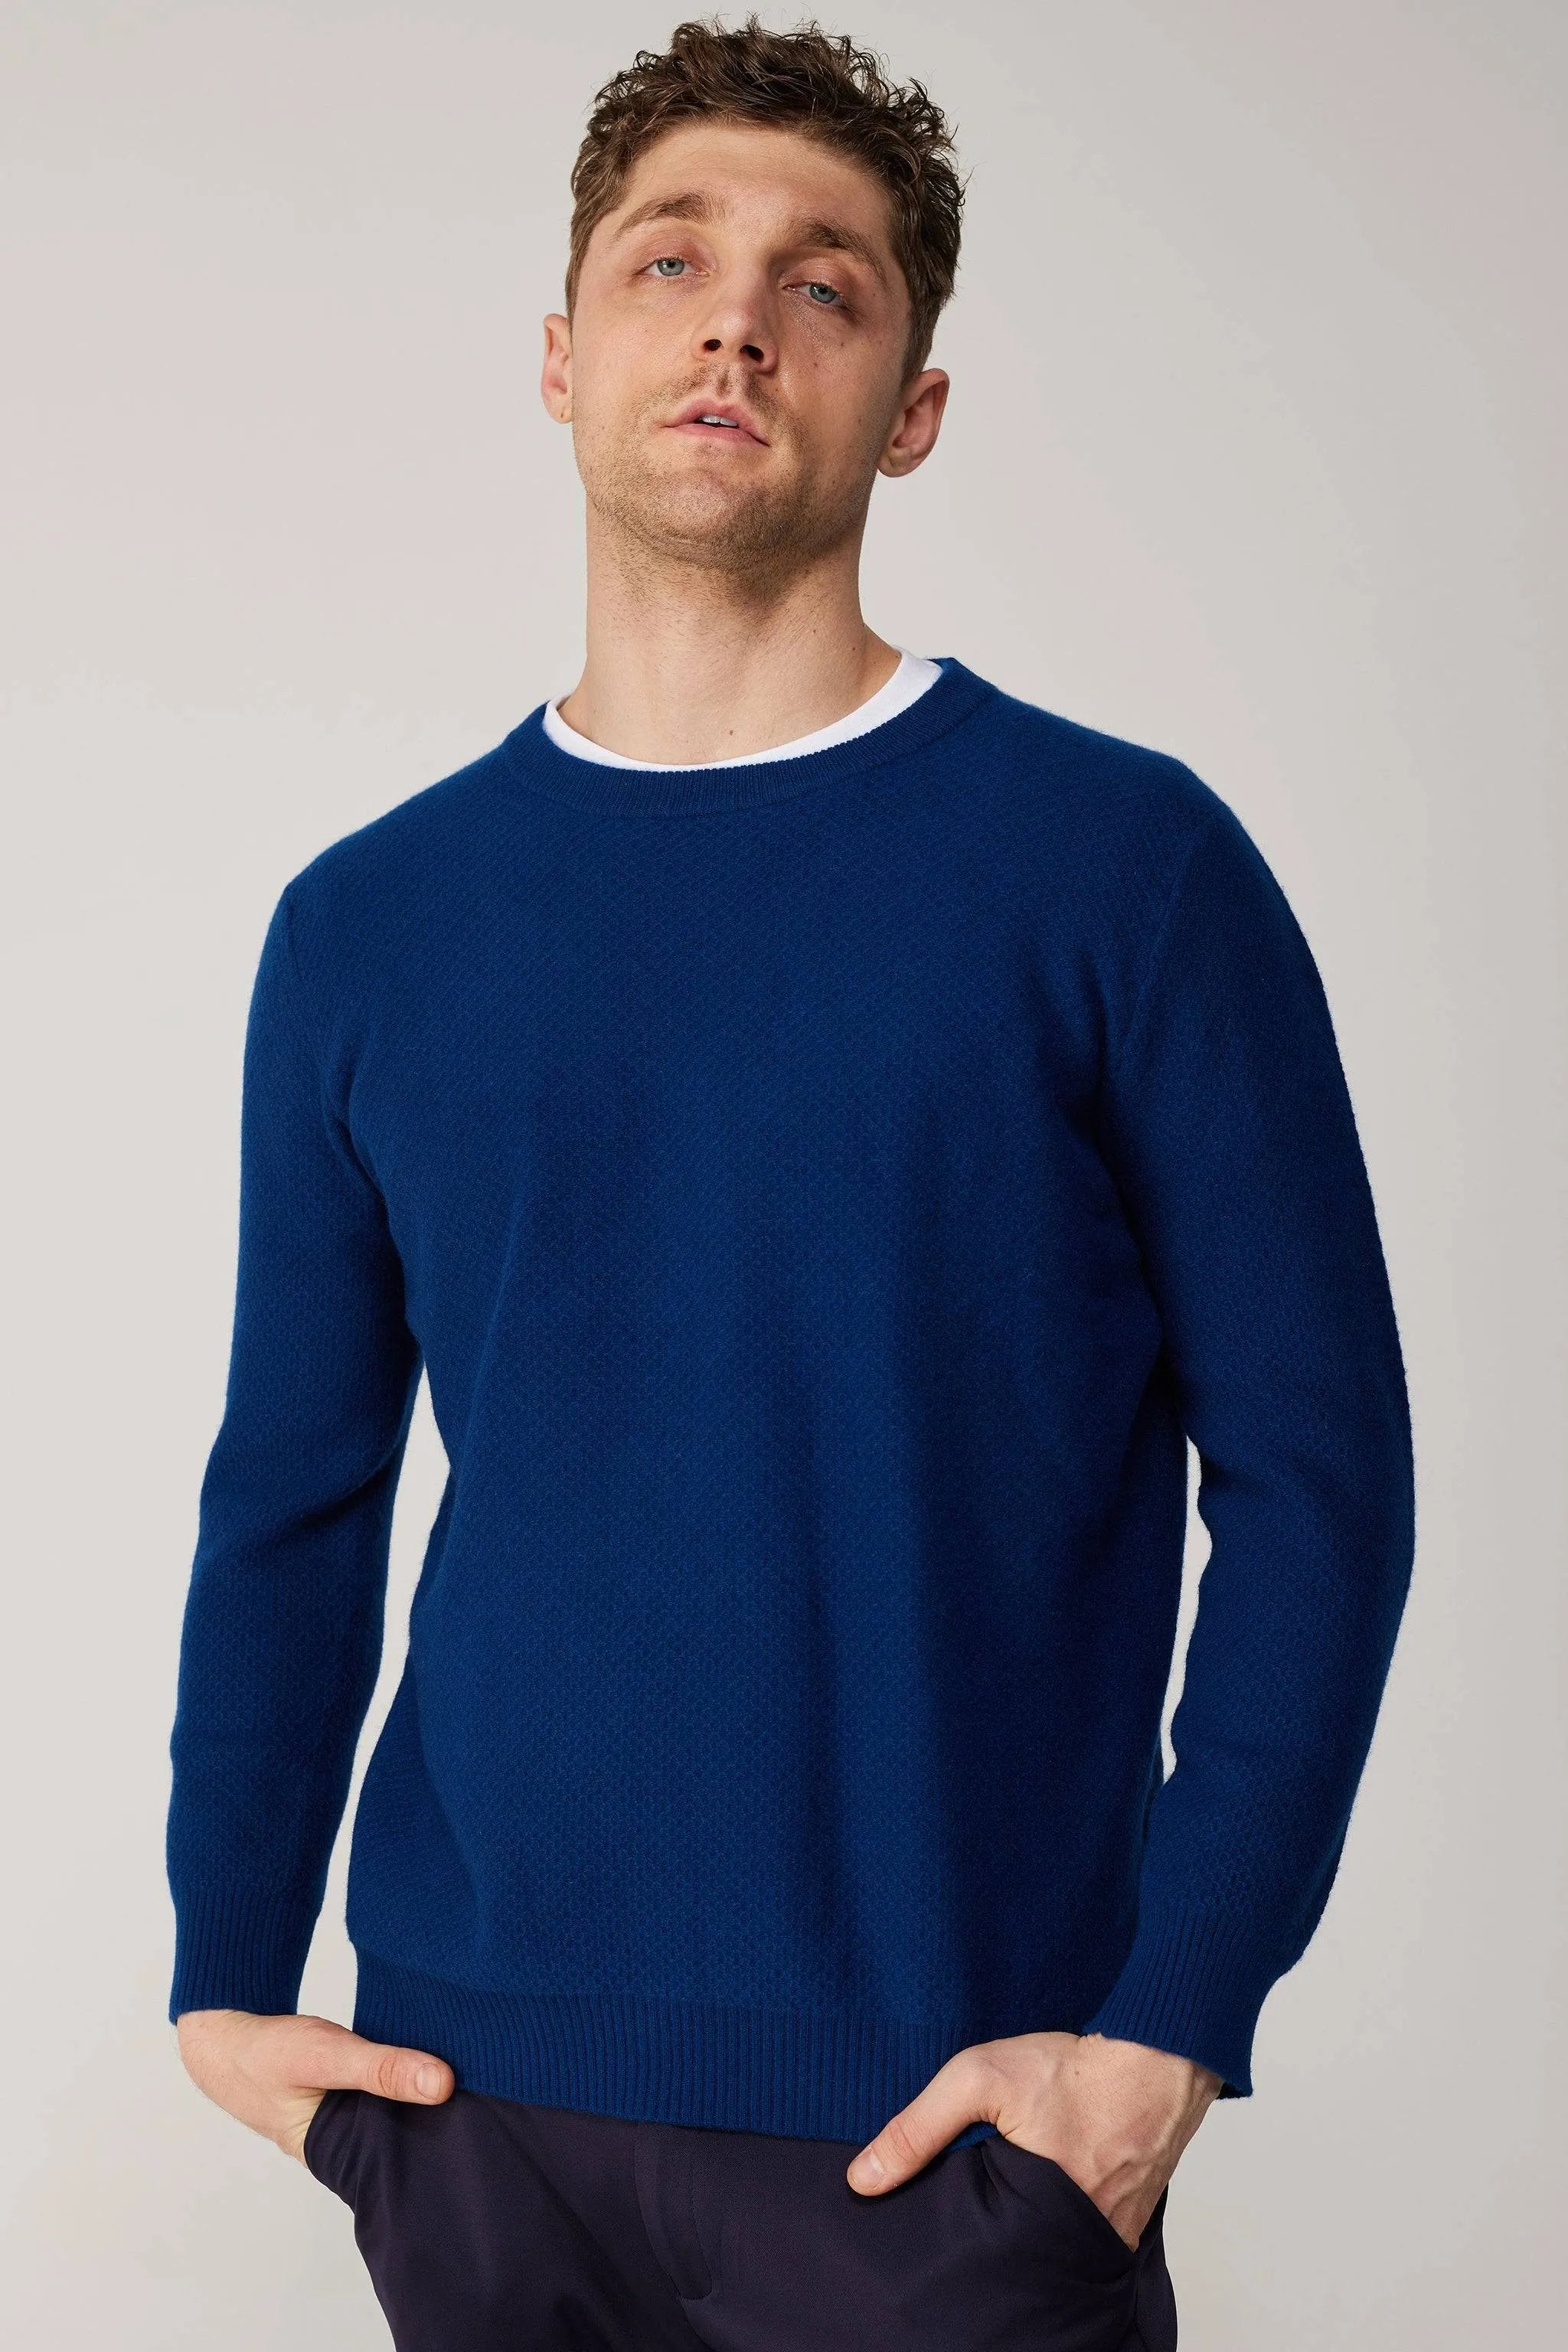 a man in a blue sweater poses for a picture